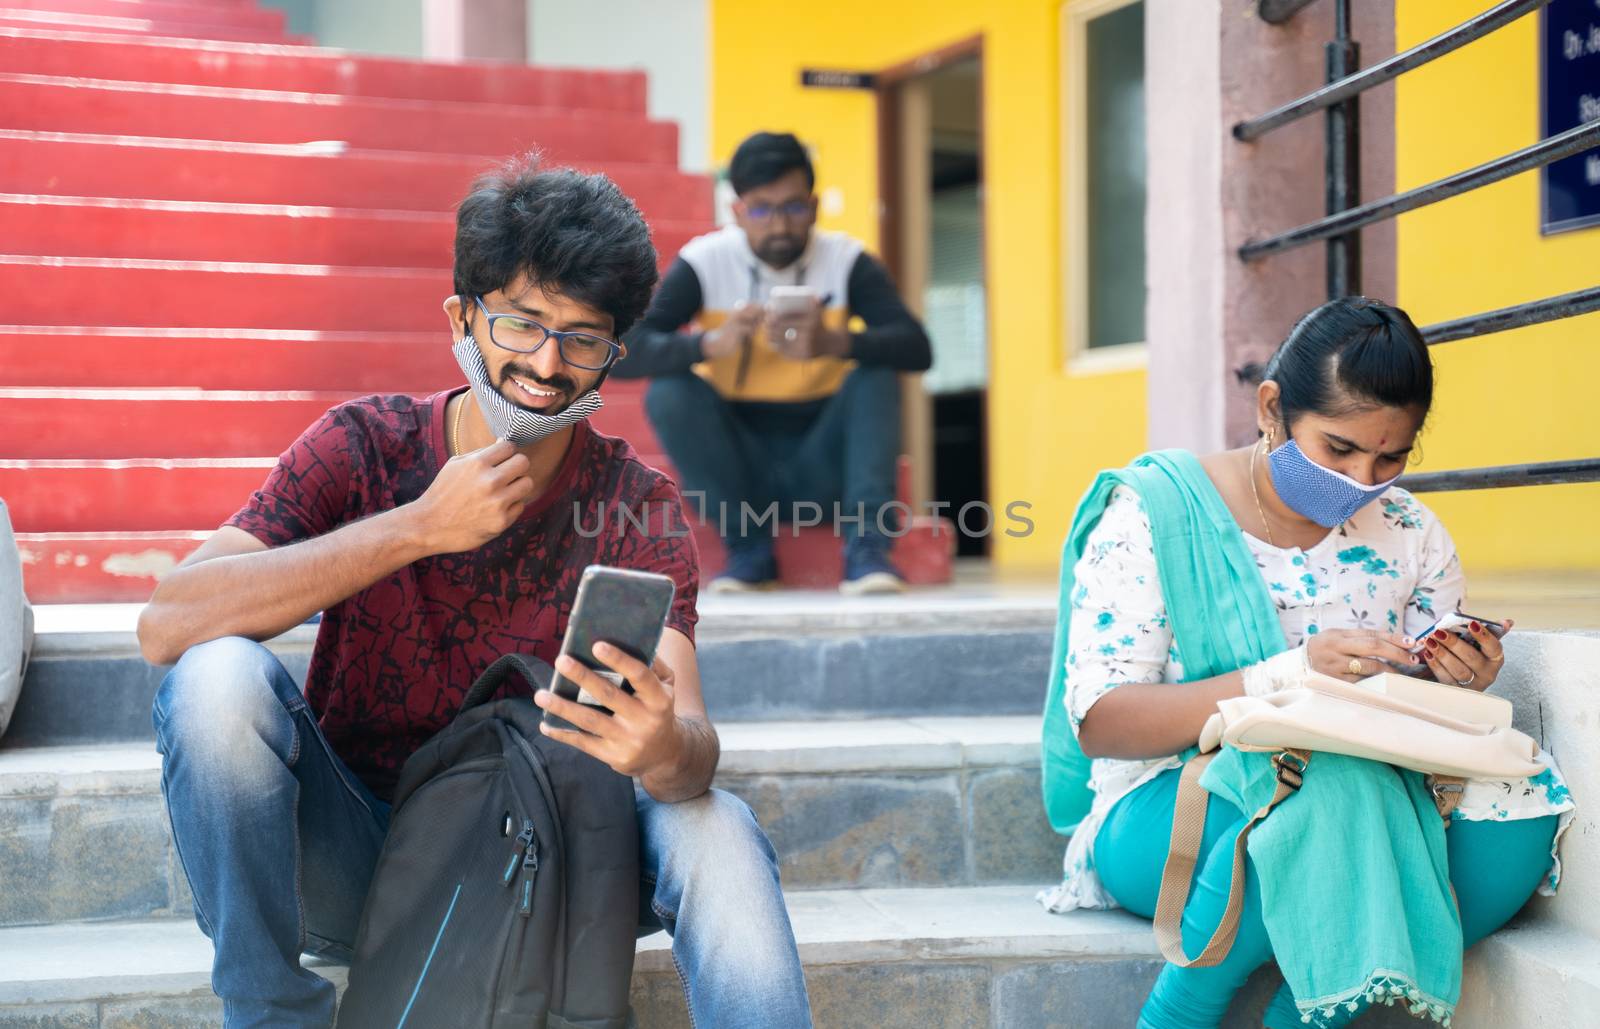 college students busy using mobile with face mask - happy millennial friends at university campus having fun during break - Concept of new normal lifestyle after college reopen. by lakshmiprasad.maski@gmai.com